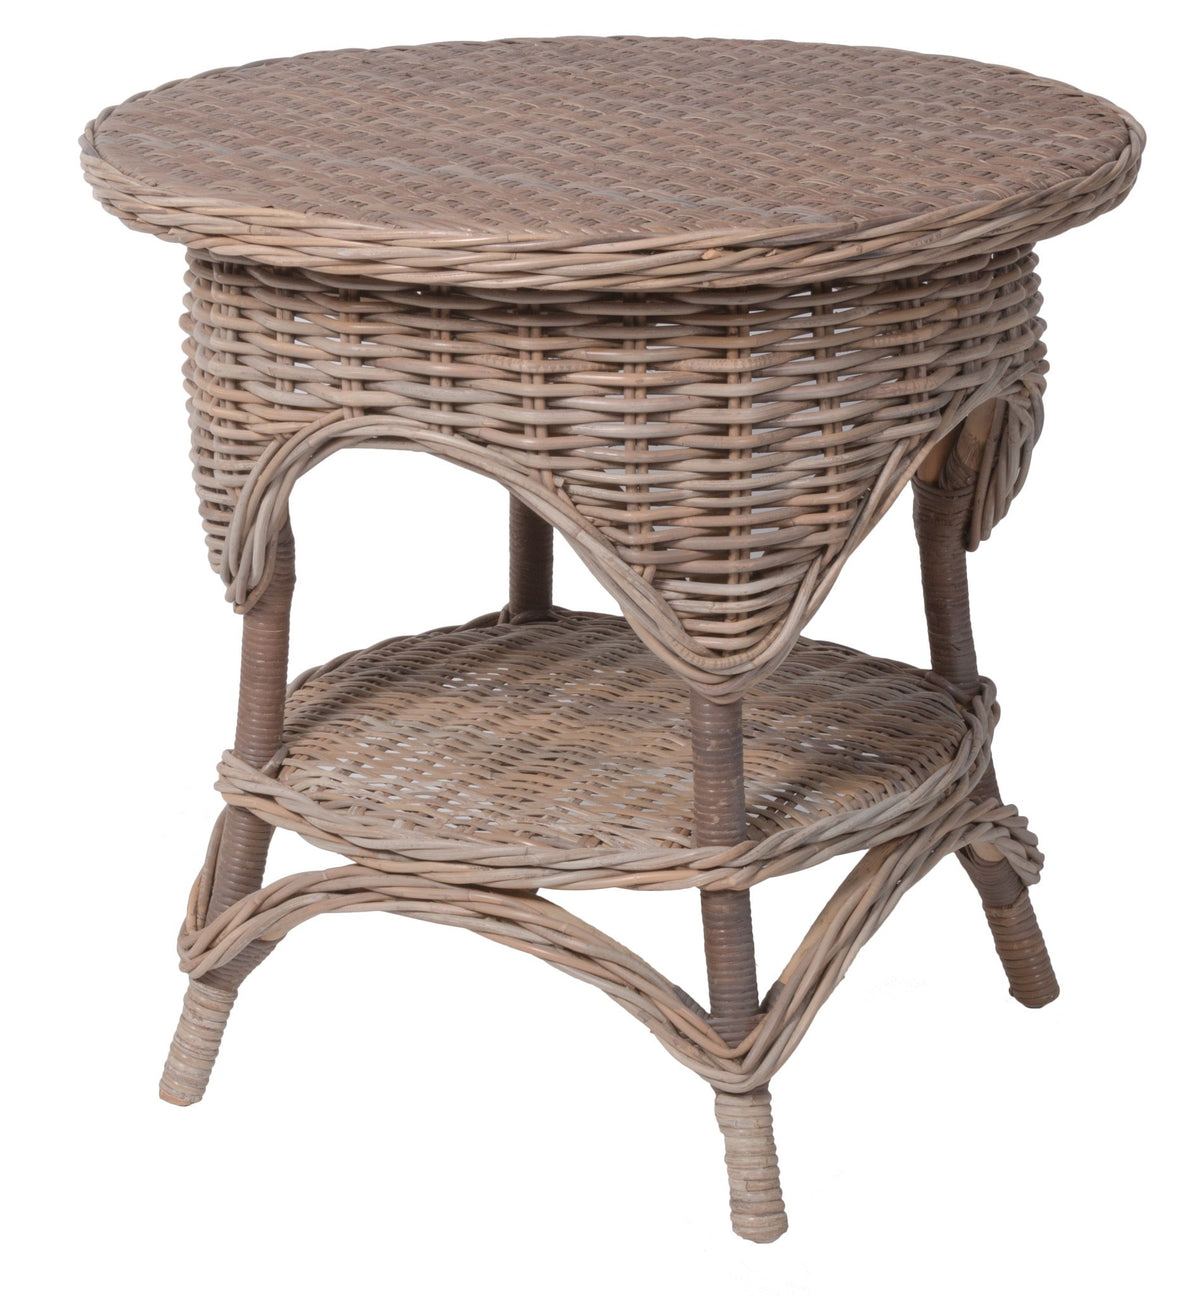 Designer Wicker &amp; Rattan By Tribor Conservatory End Table End Table - Rattan Imports